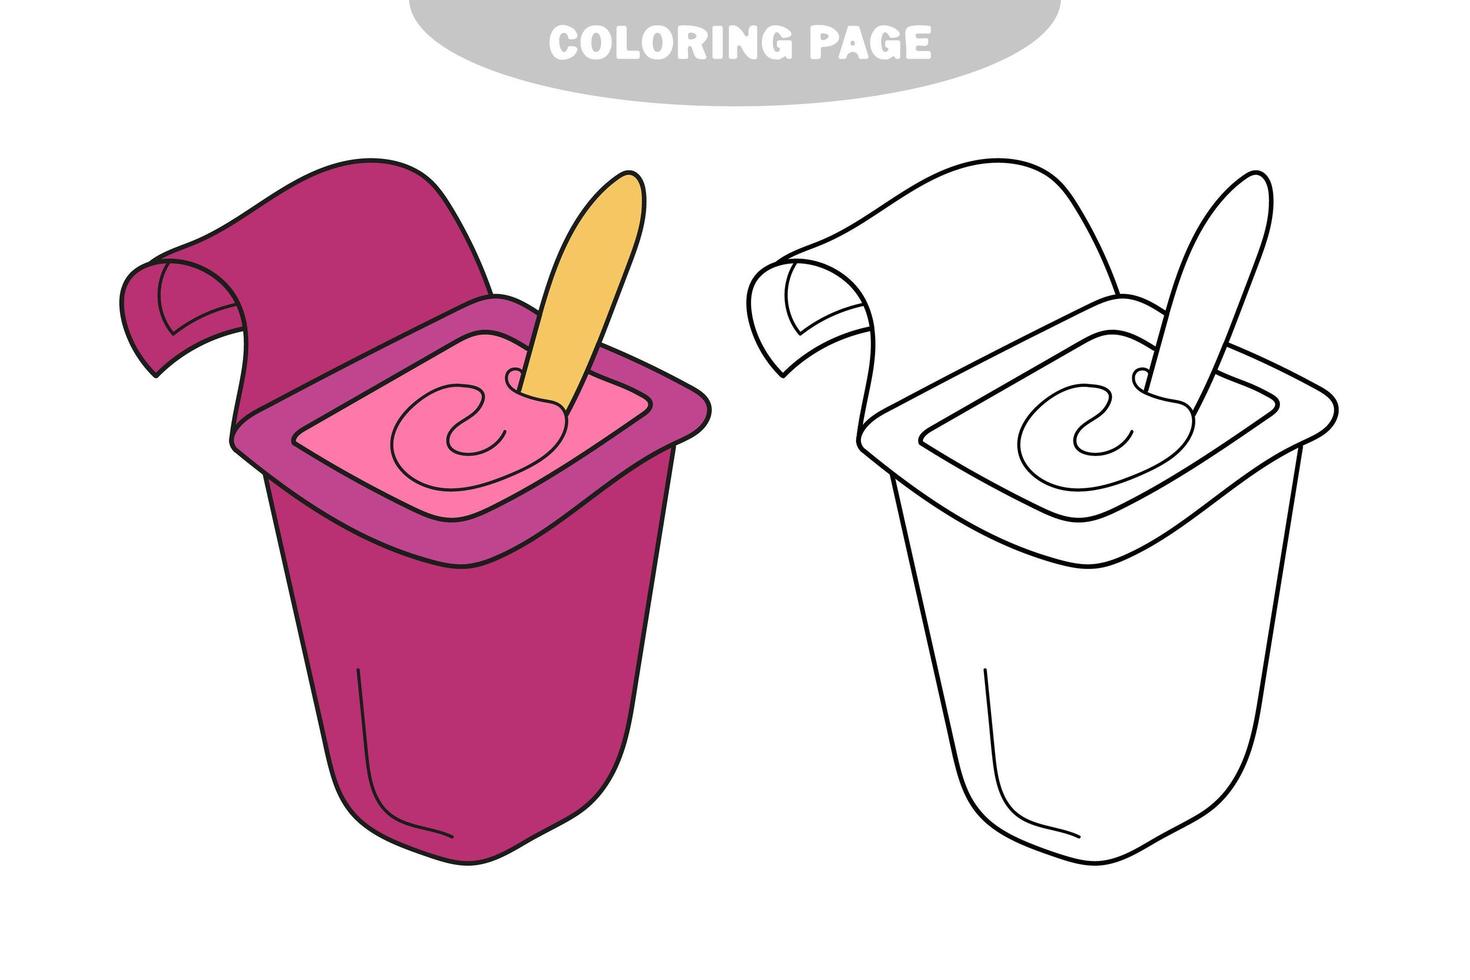 Simple coloring page. Funny Yogurt to be colored, the coloring book for kids vector